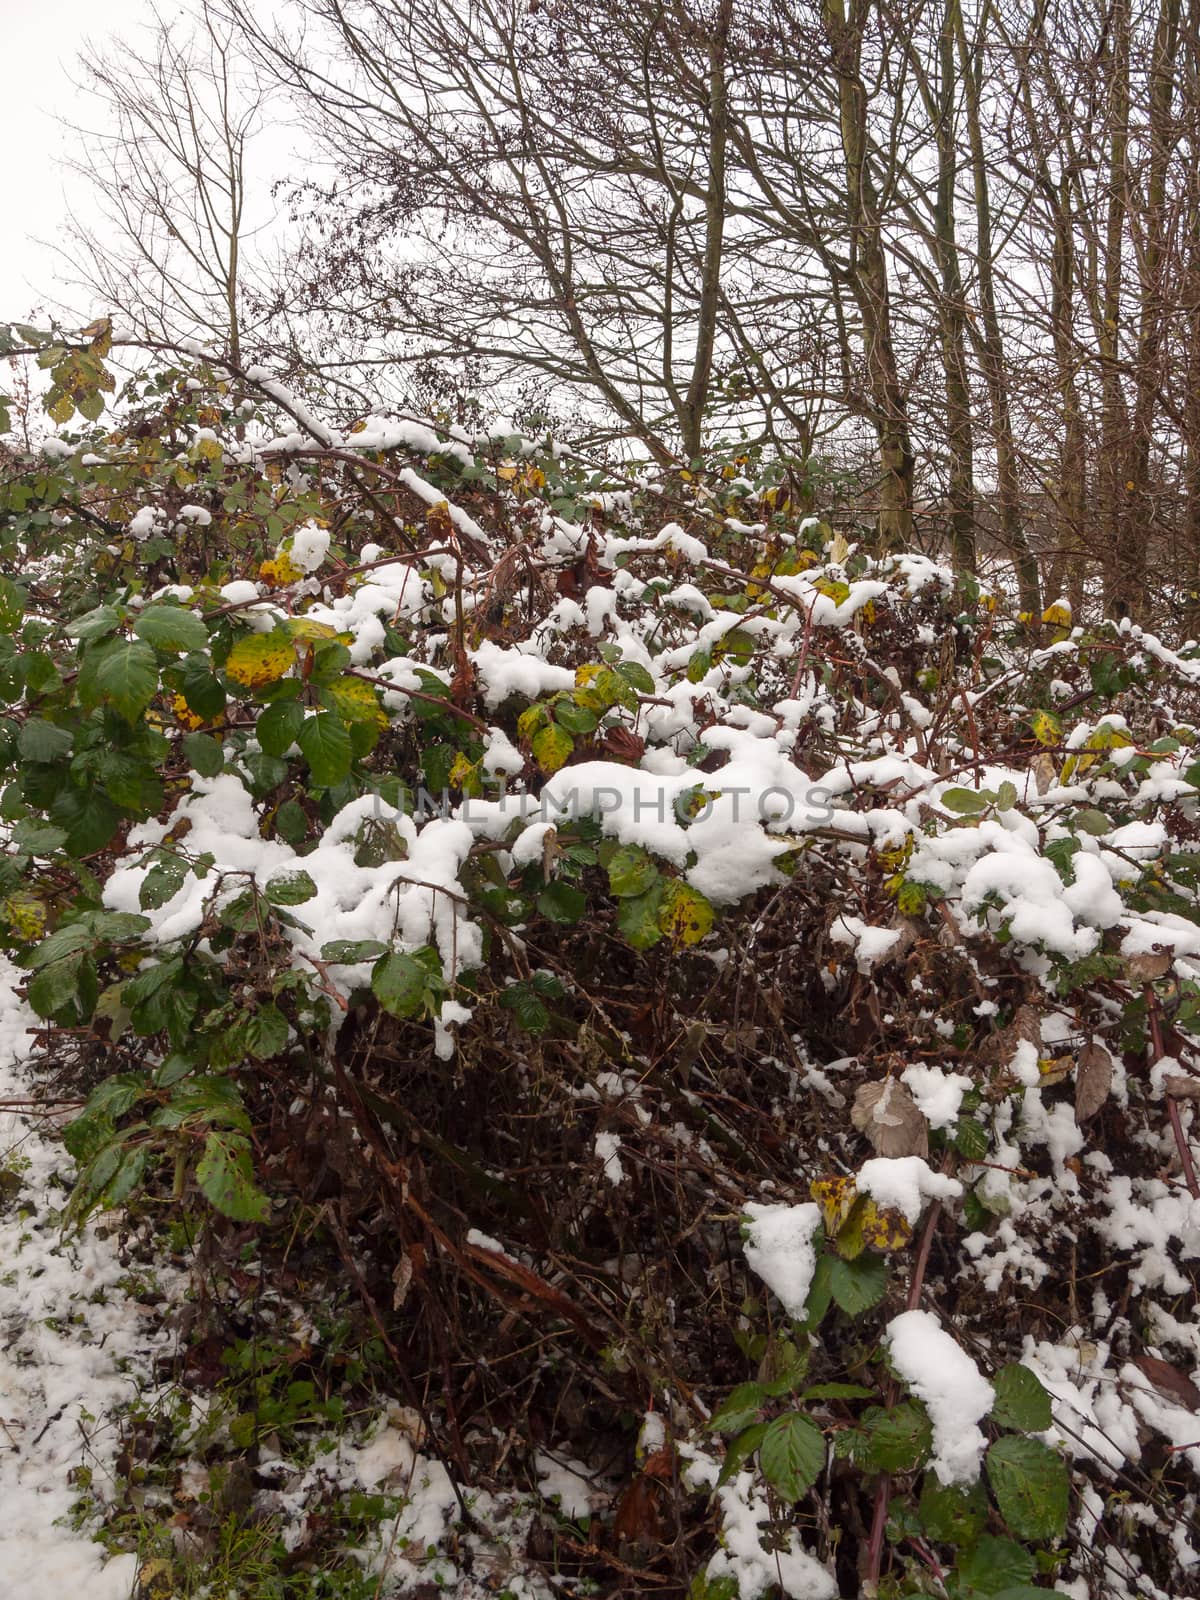 snow covered foliage outside forest green brown dead dying close up; essex; england; uk